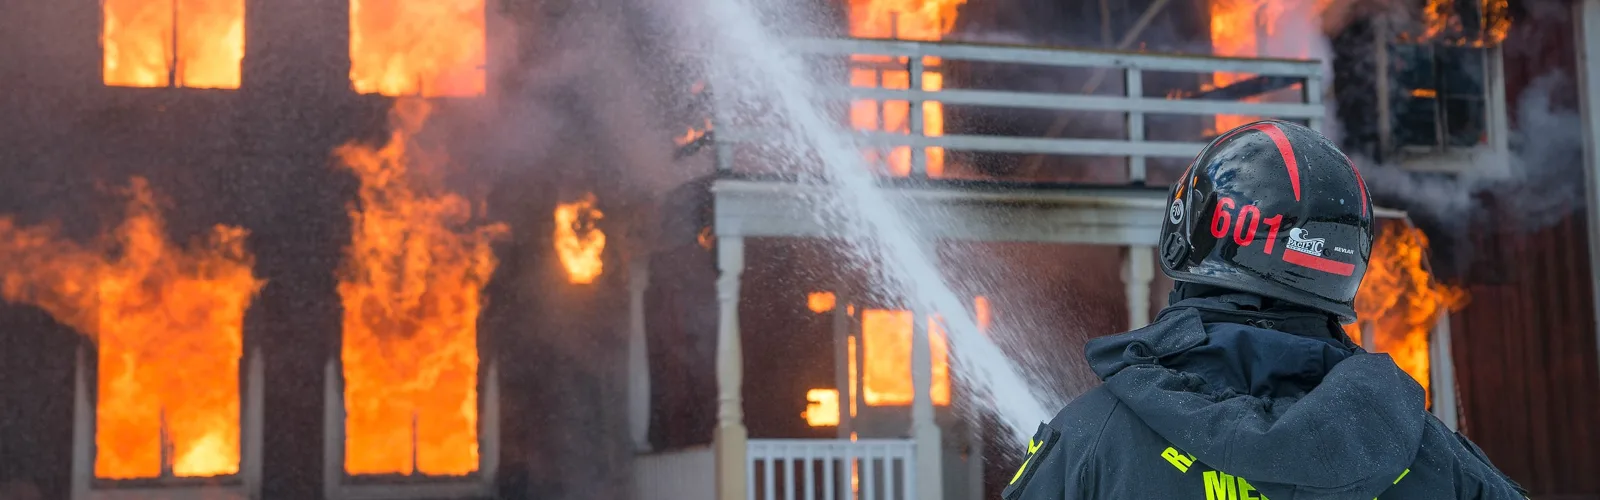 banner house fires 1600x500